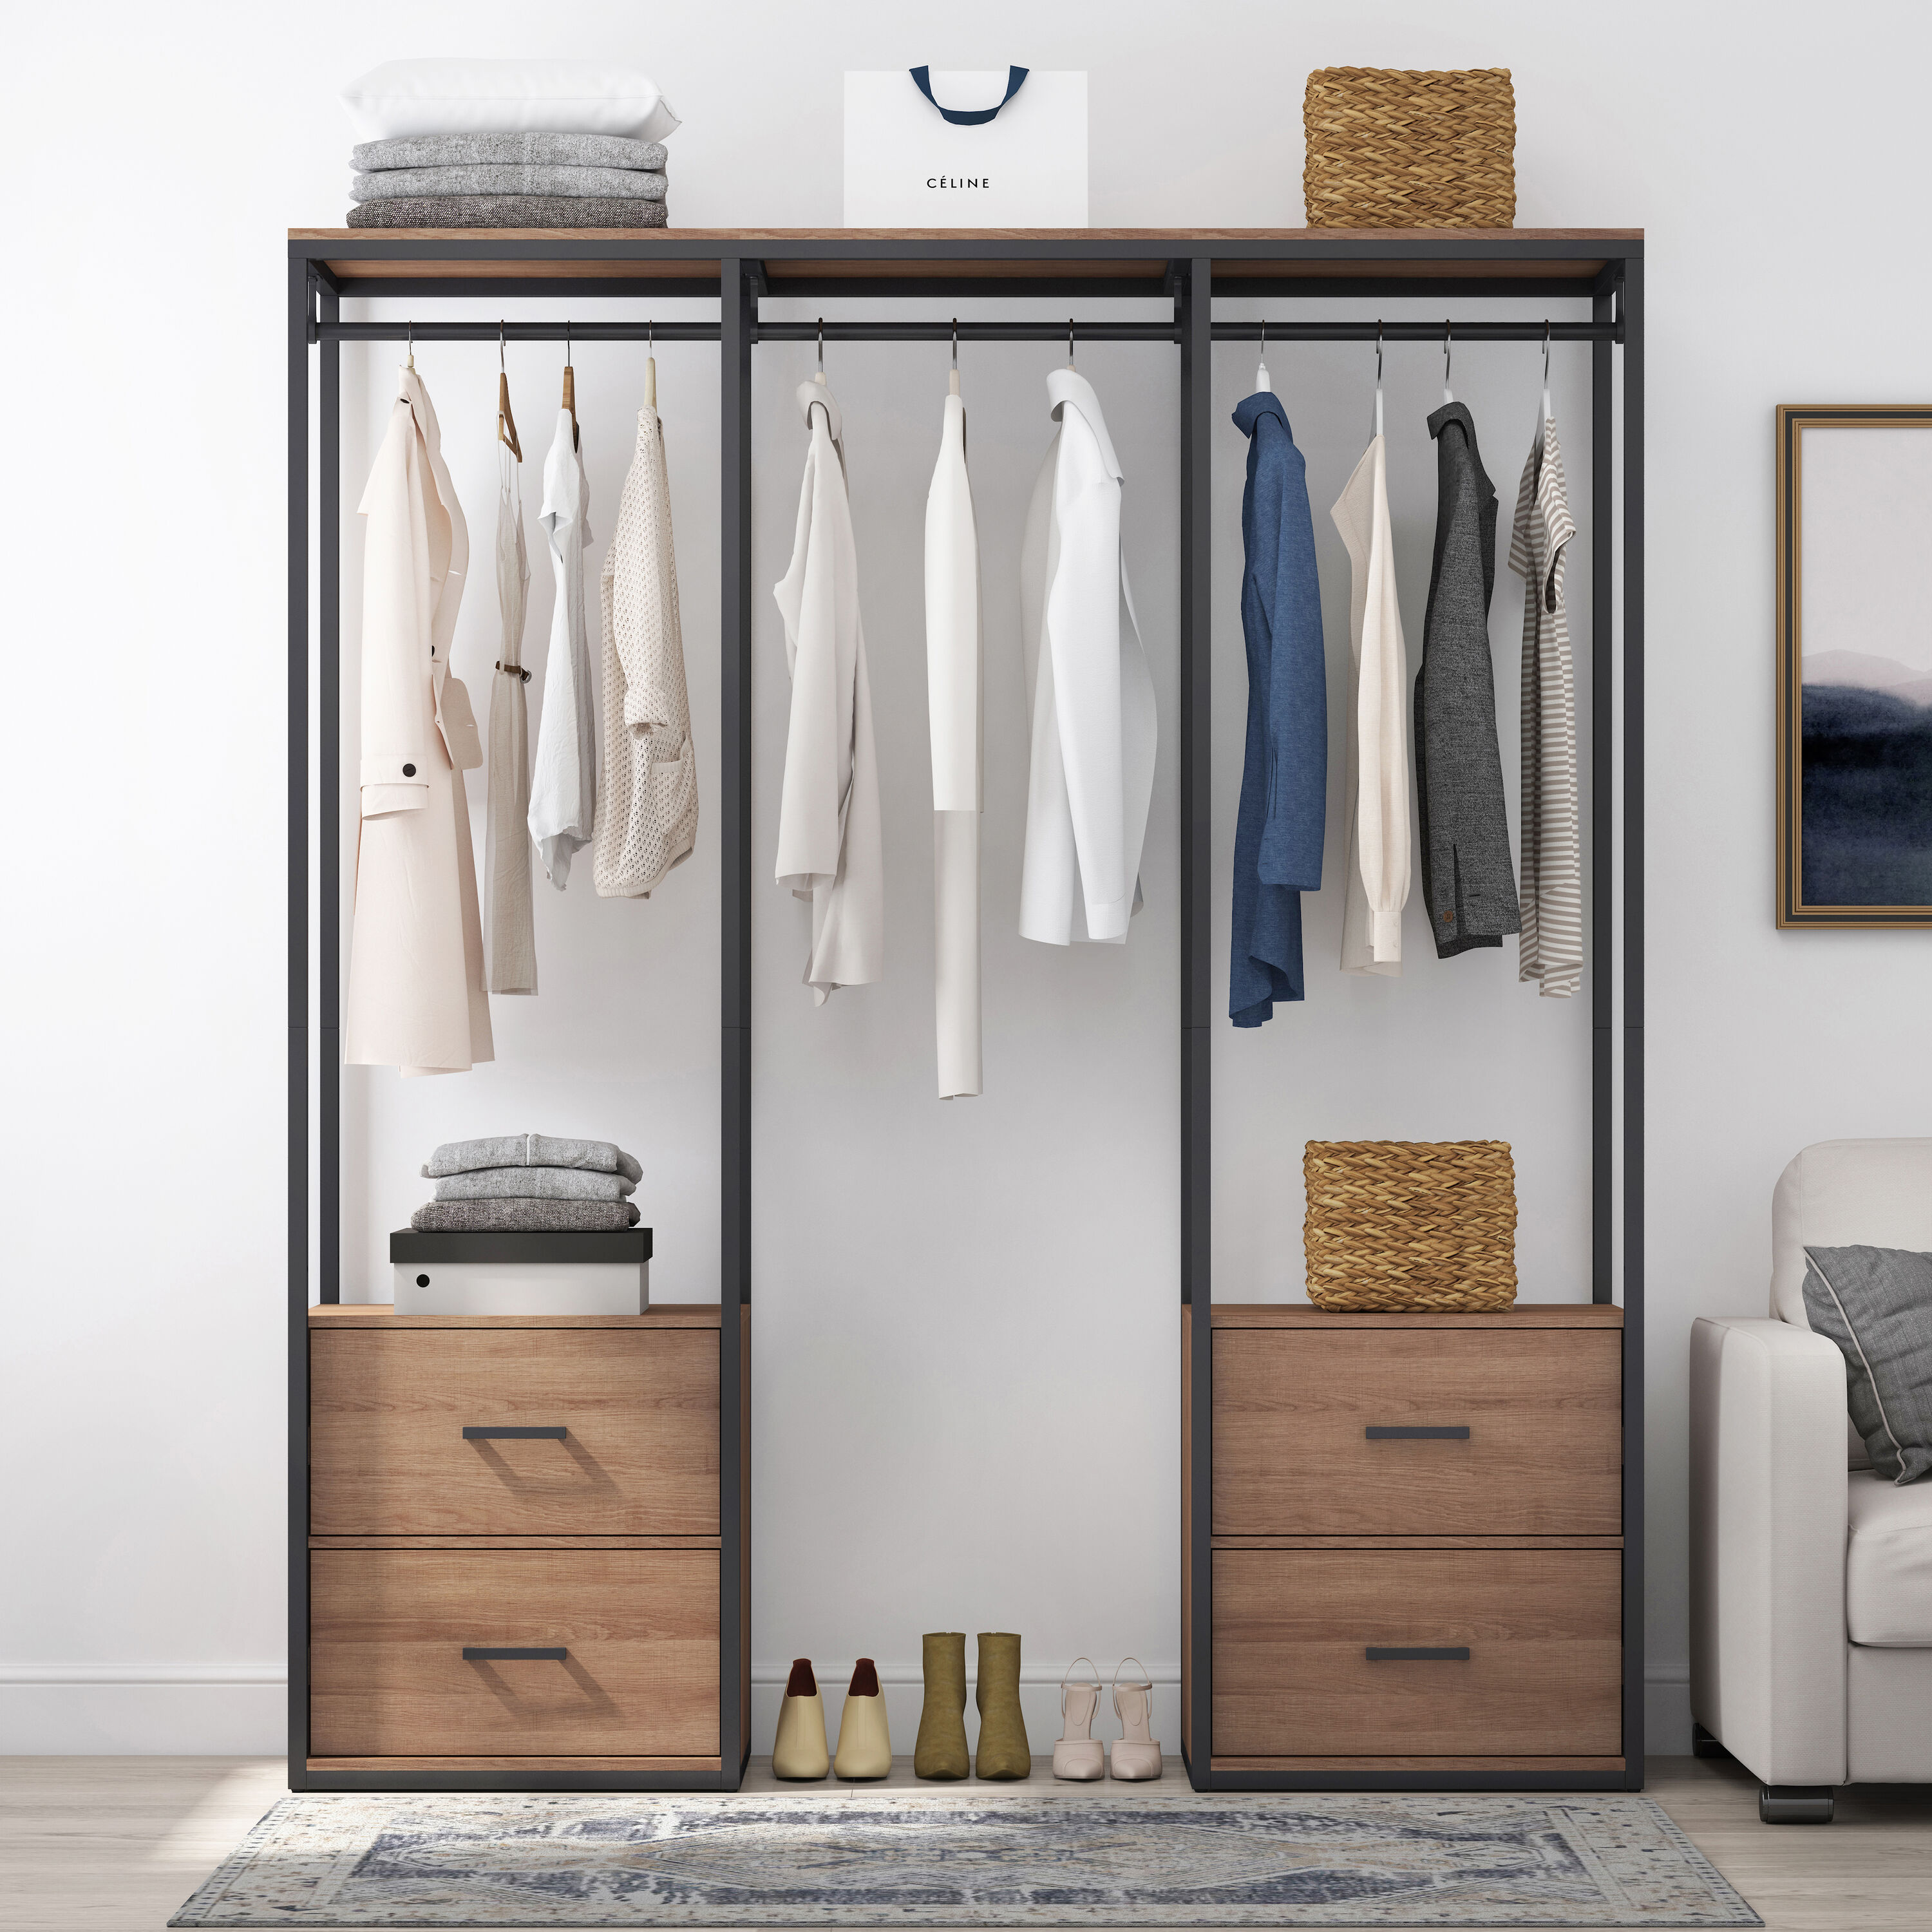 Shop Style Selections Camryn Clothing Rack Storage Solution at Lowes.com